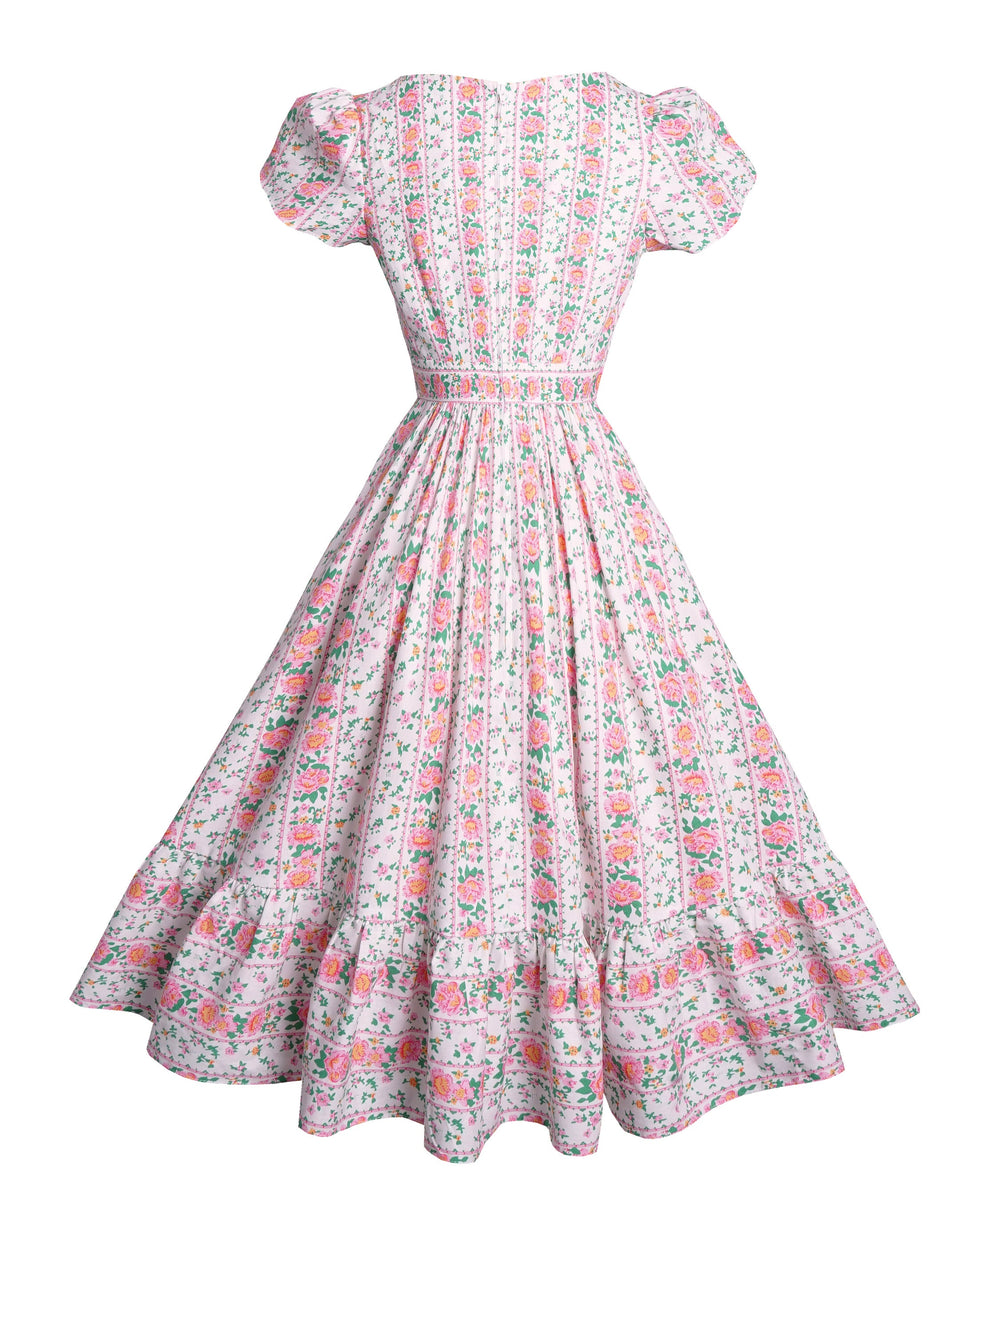 MTO - Ava Dress Pink "Country Cottage Floral"